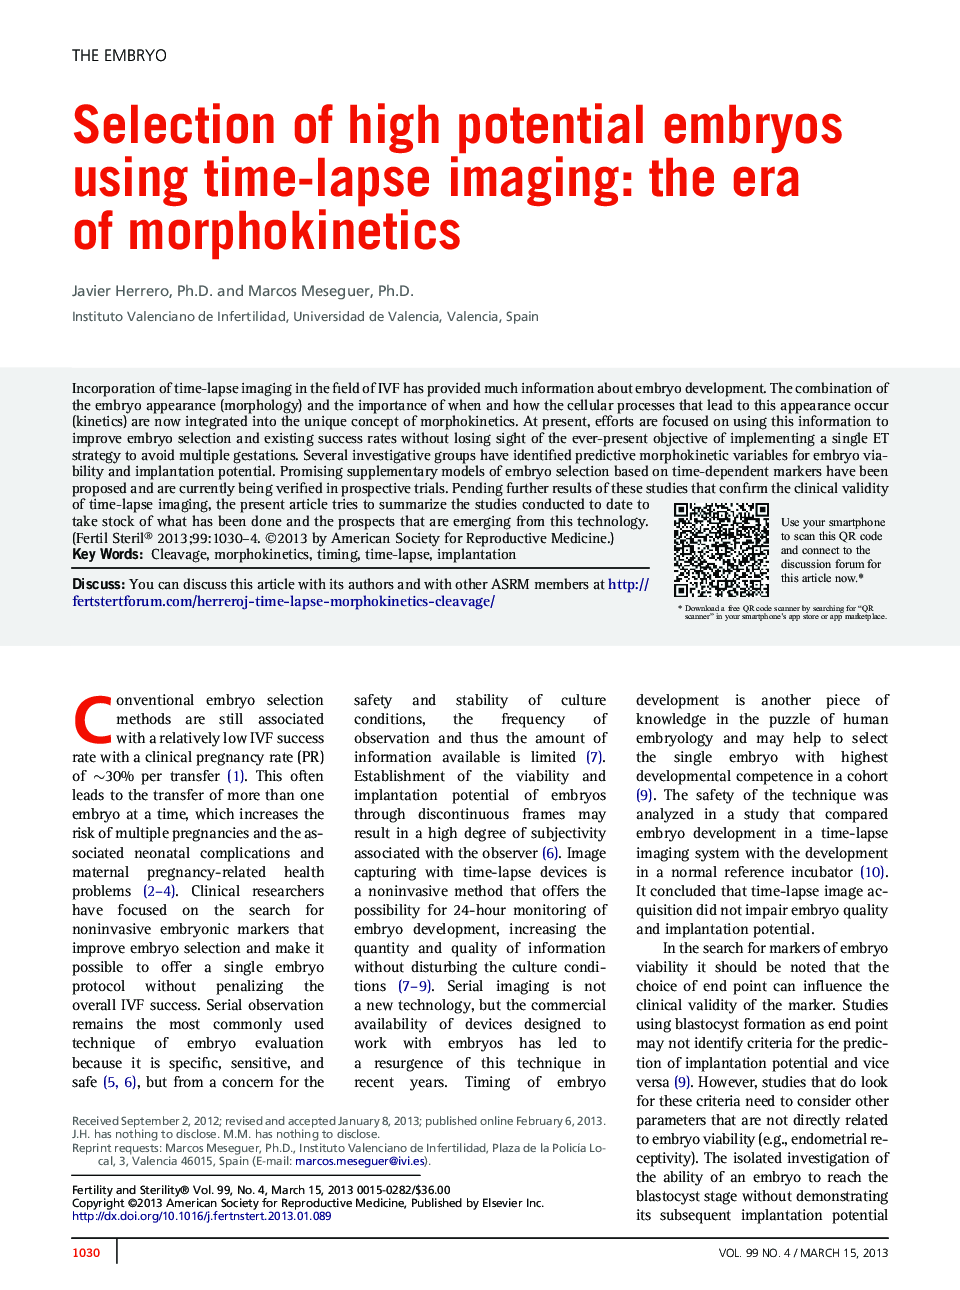 Selection of high potential embryos using time-lapse imaging: the era of morphokinetics 